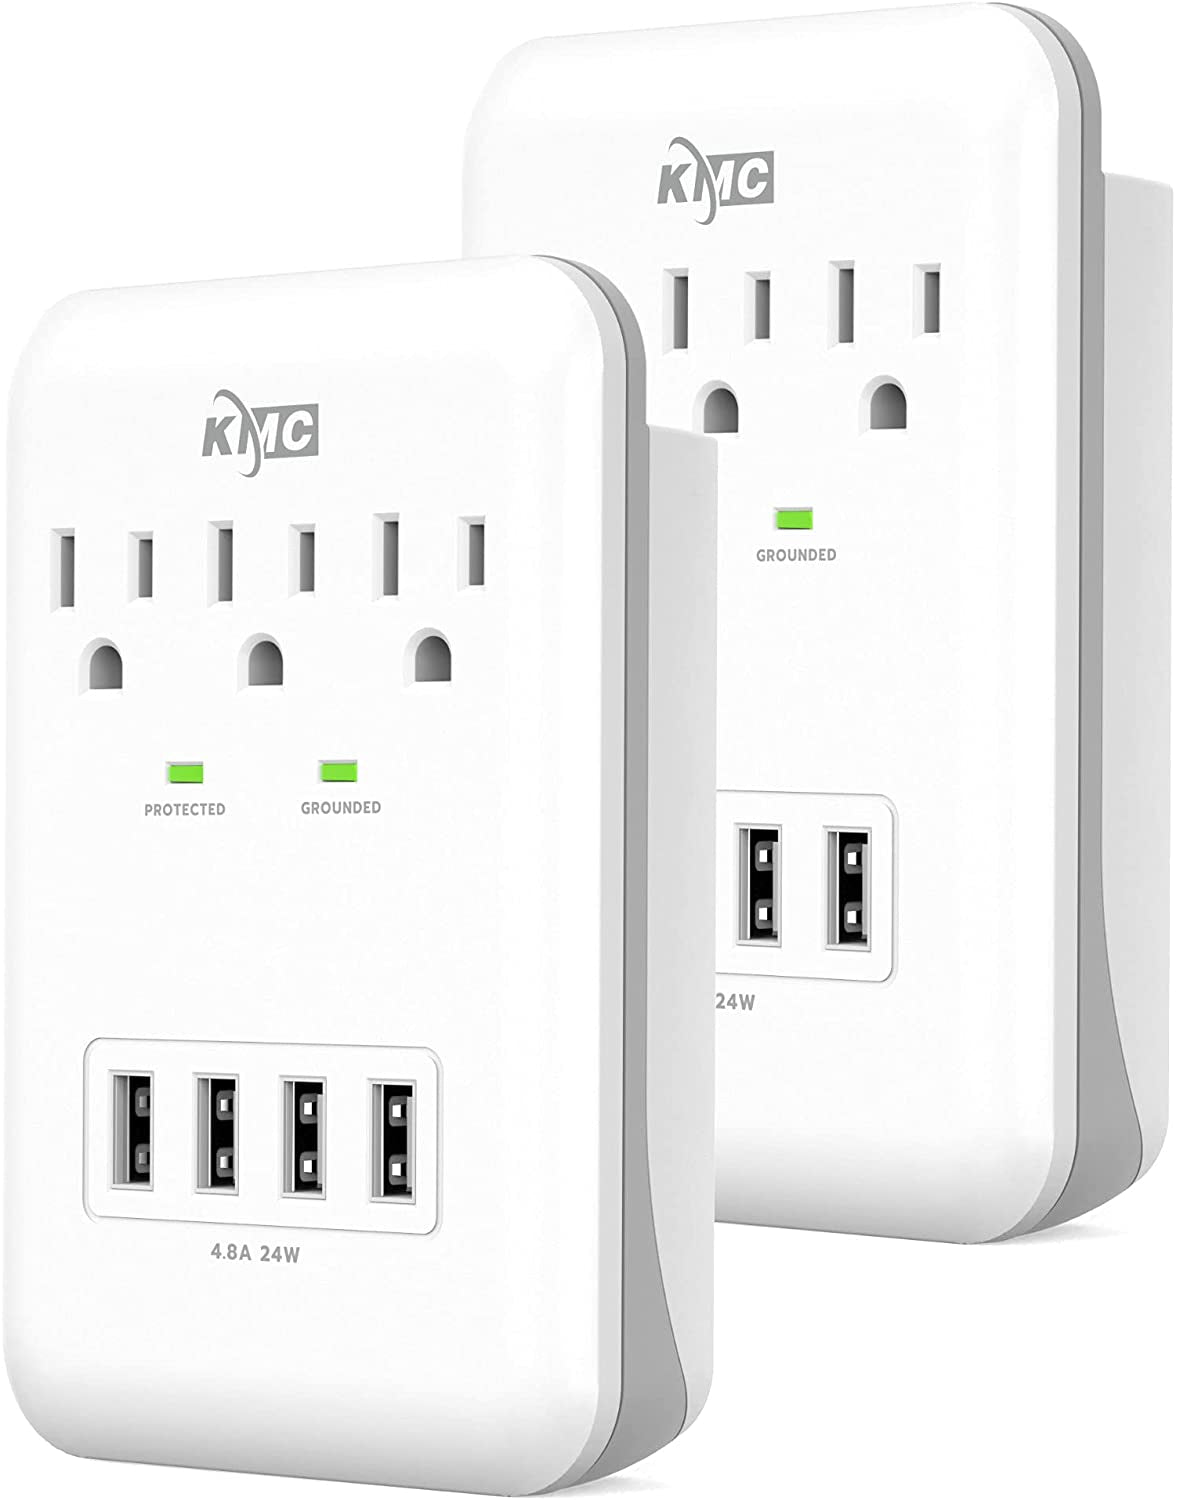 3-Outlet Wall Mount Surge Protector, 900 Joules, 4 USB 4.8 AMP USB Charging Ports, Phone Holder Cradle for Home, School or Office, ETL Certified